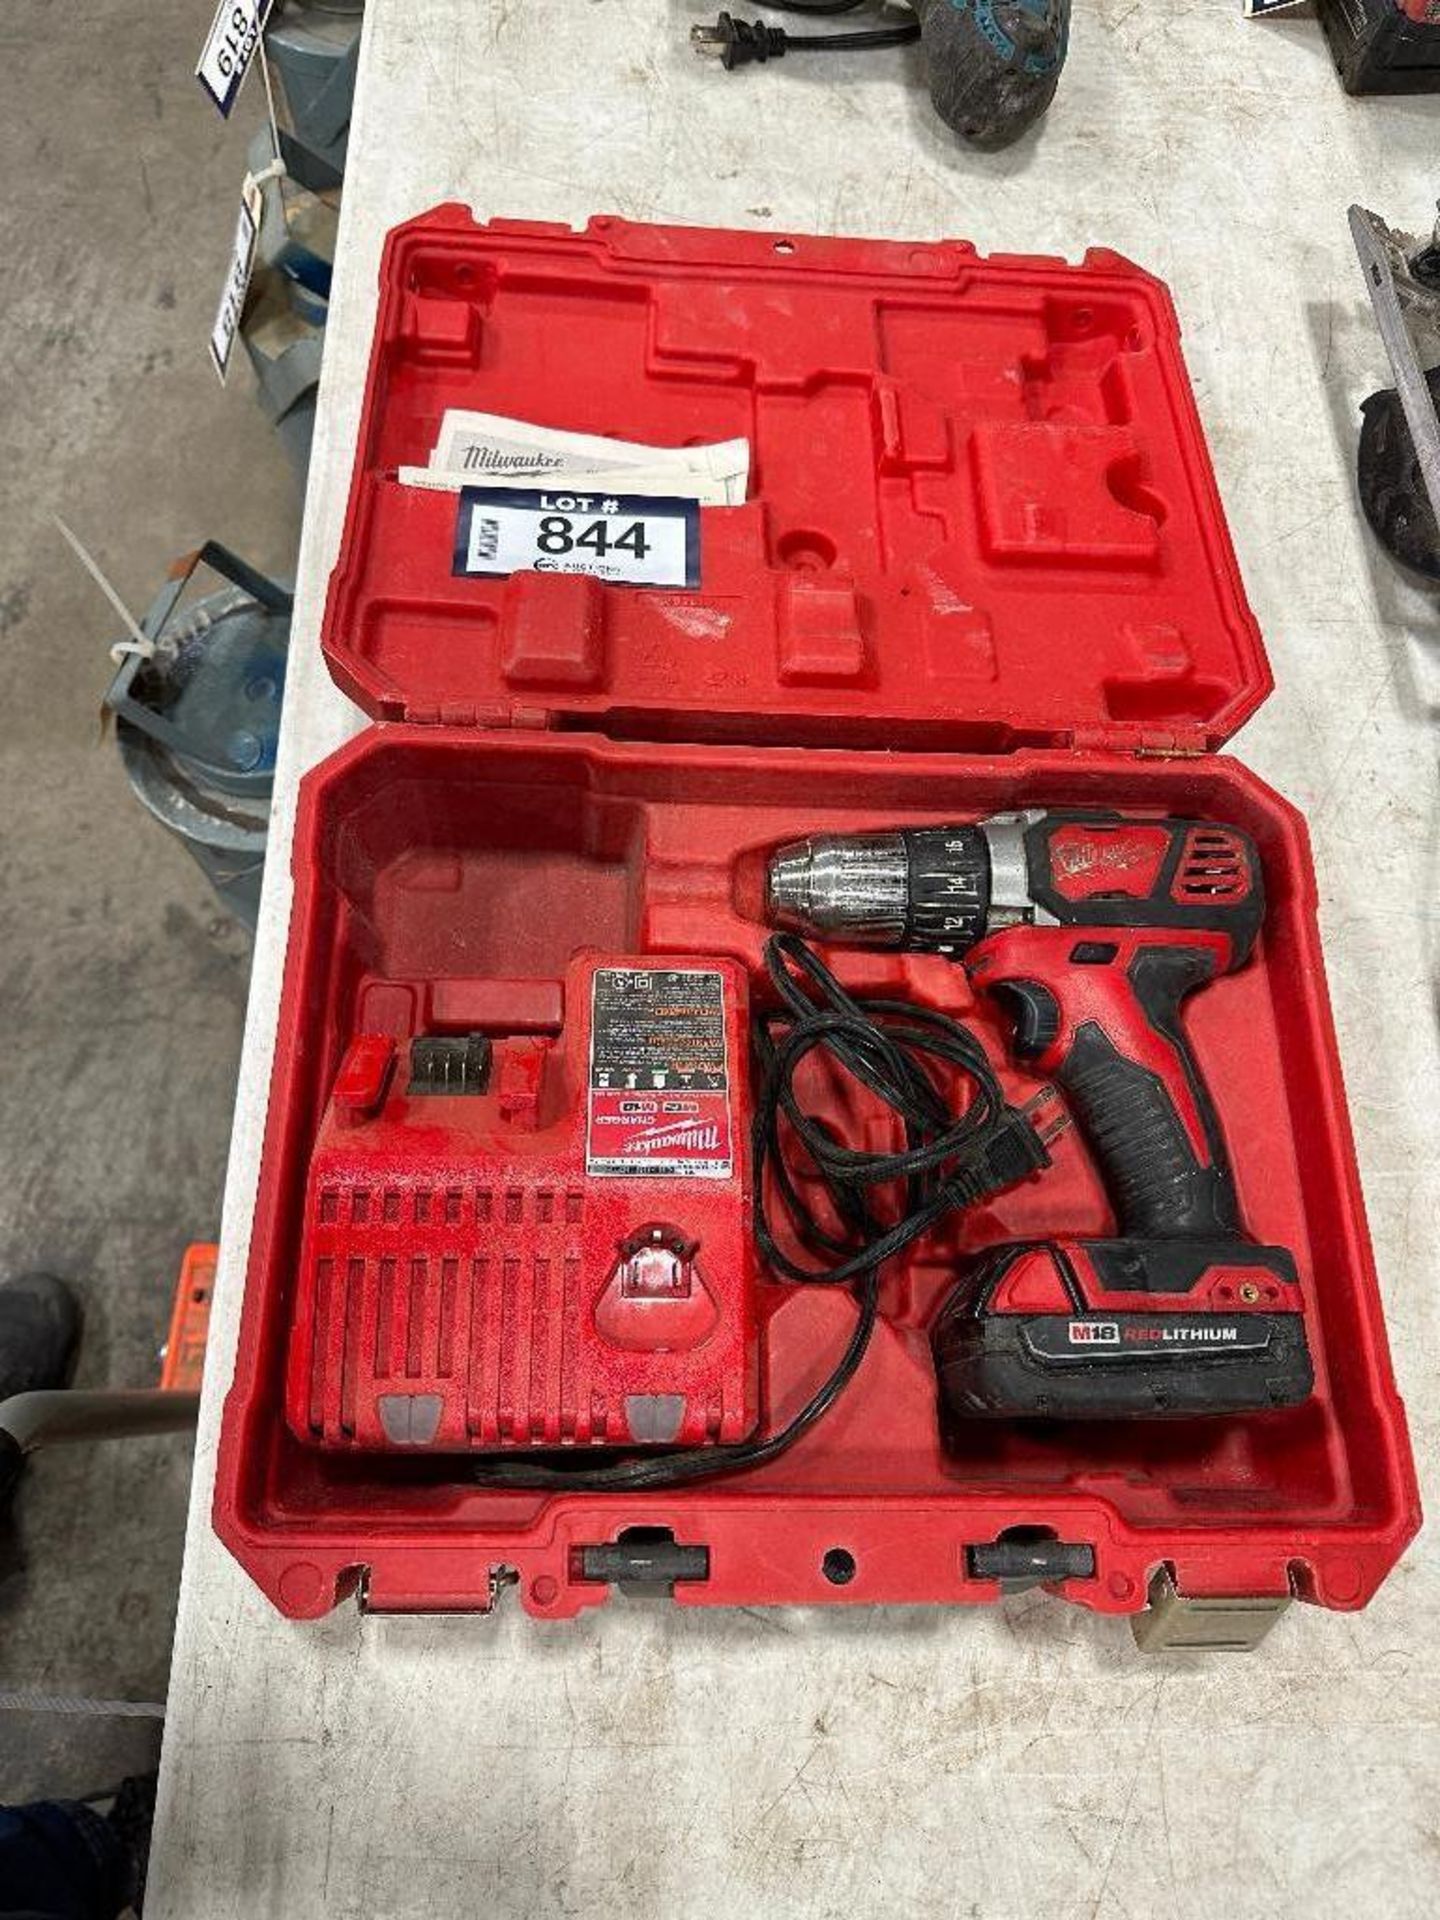 Milwaukee Cordless Drill w/ Battery, Charger, Case, etc.